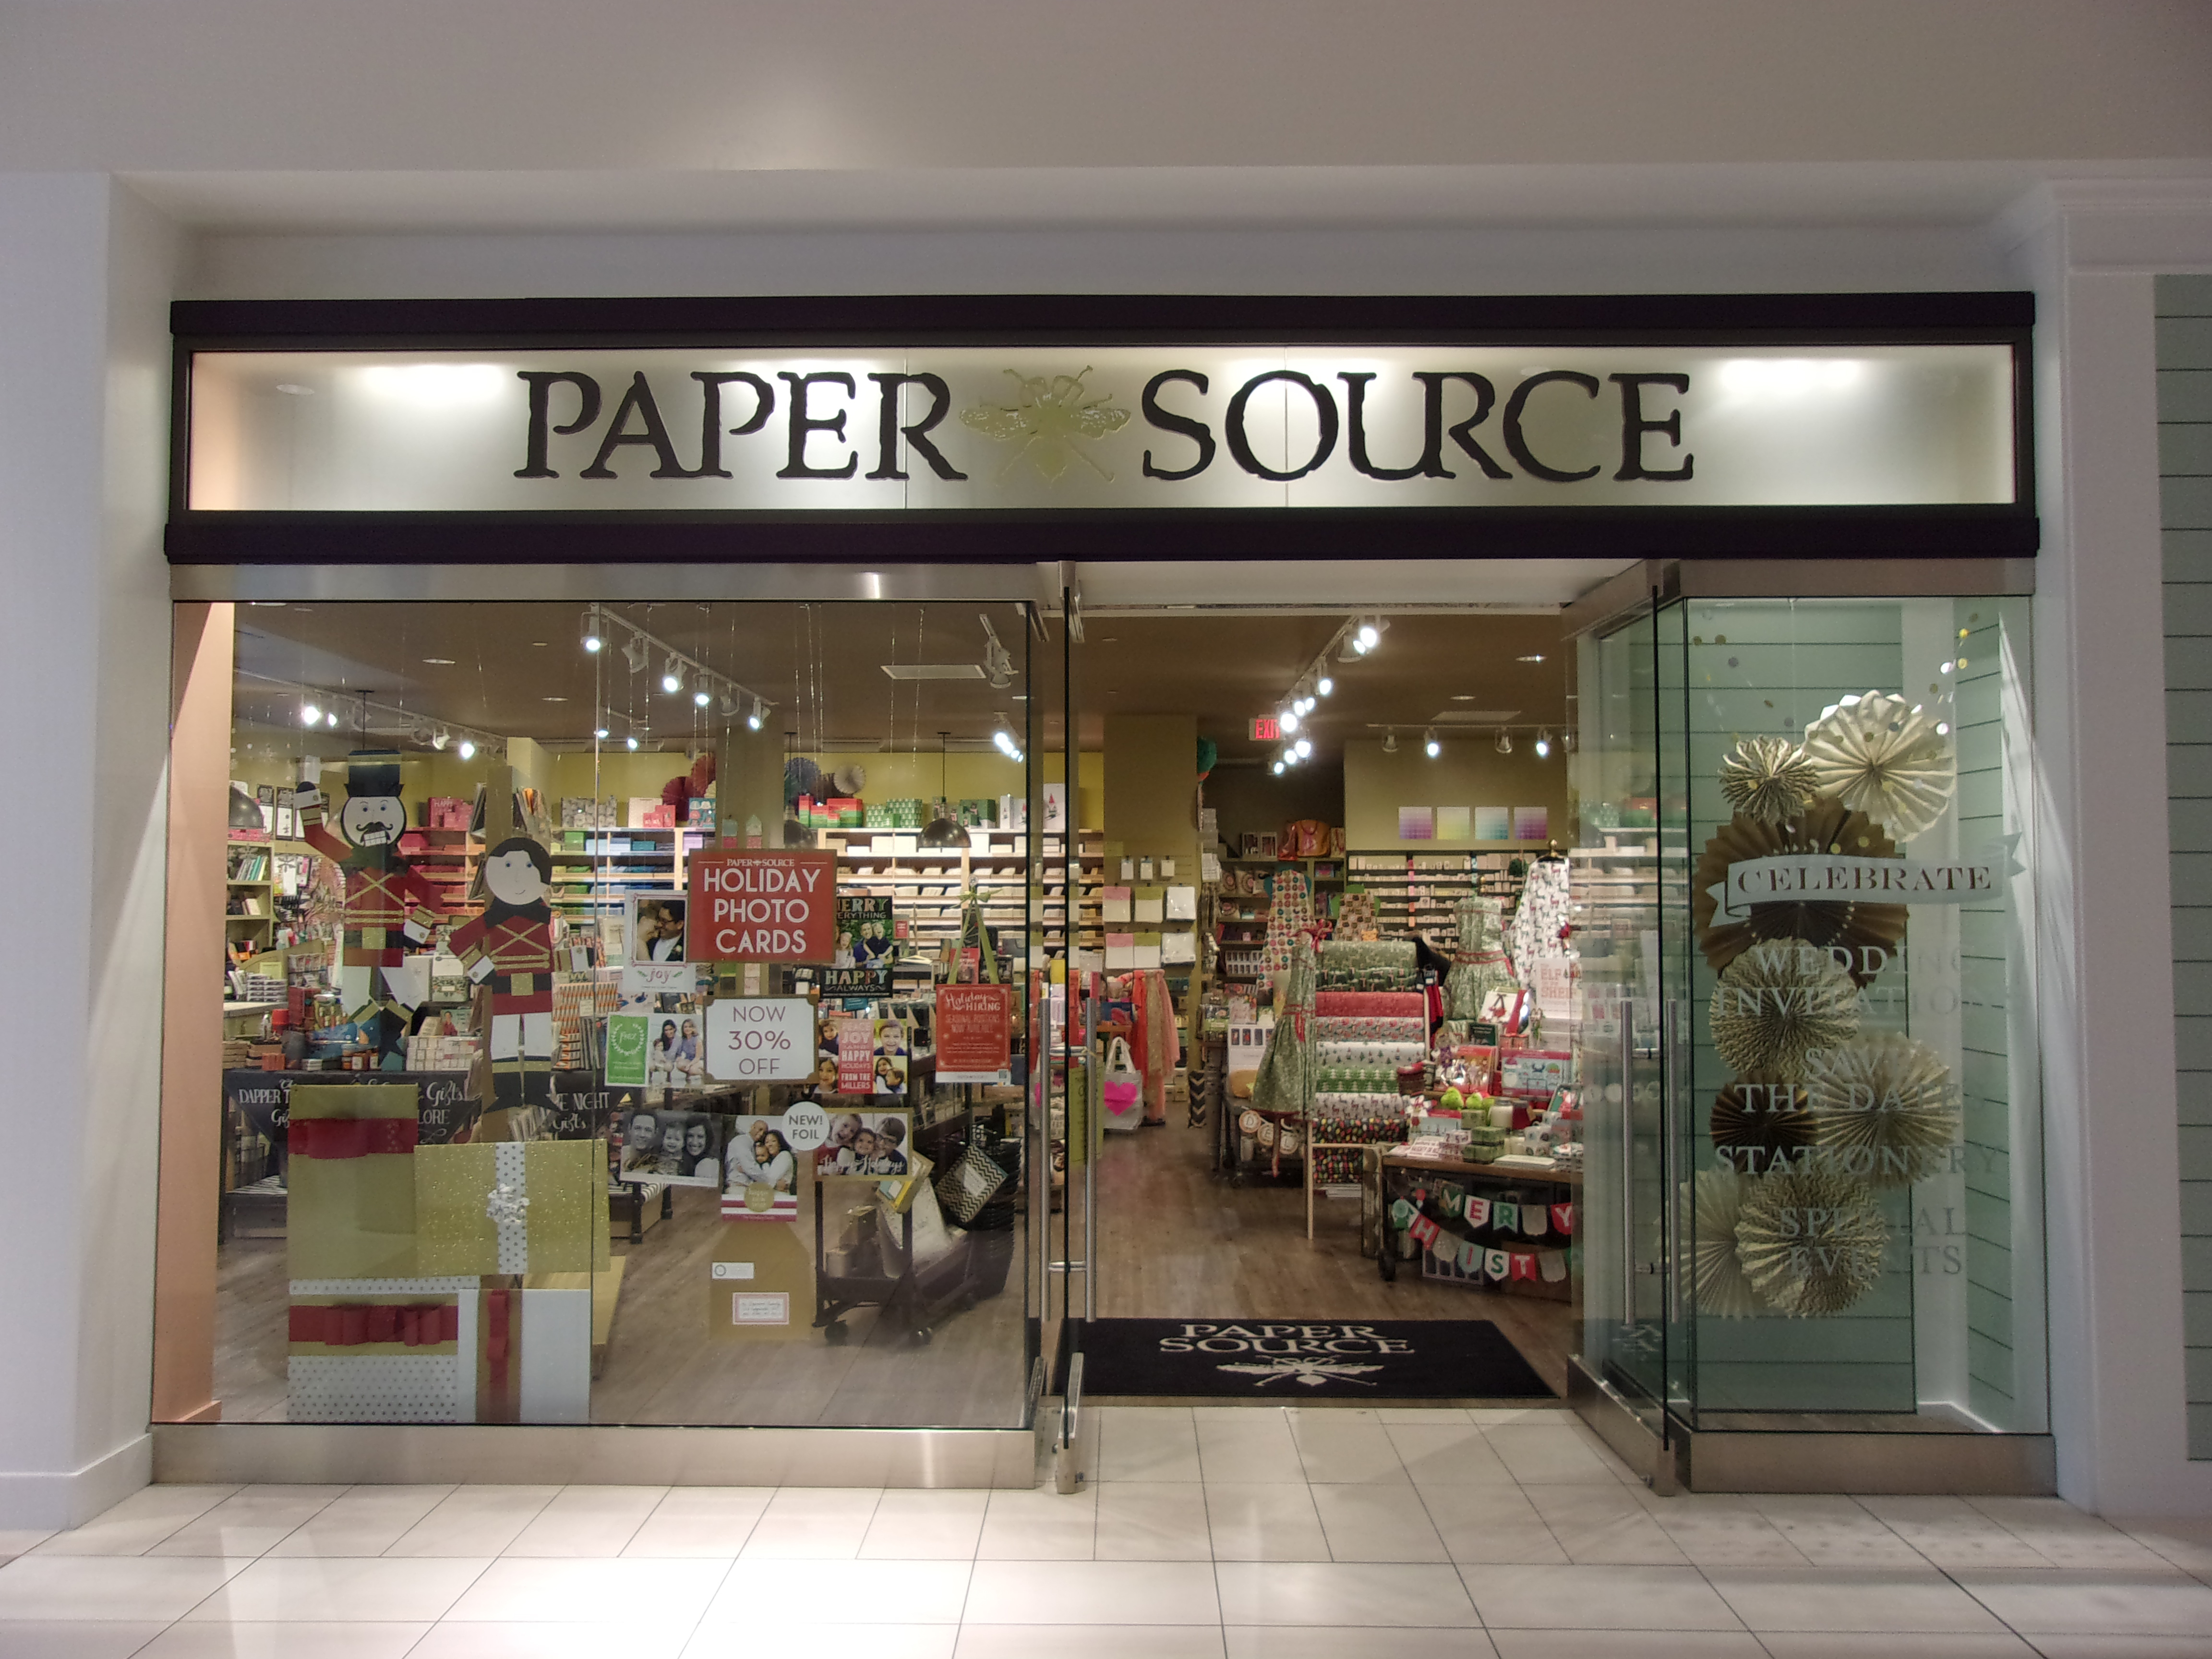 The paper store